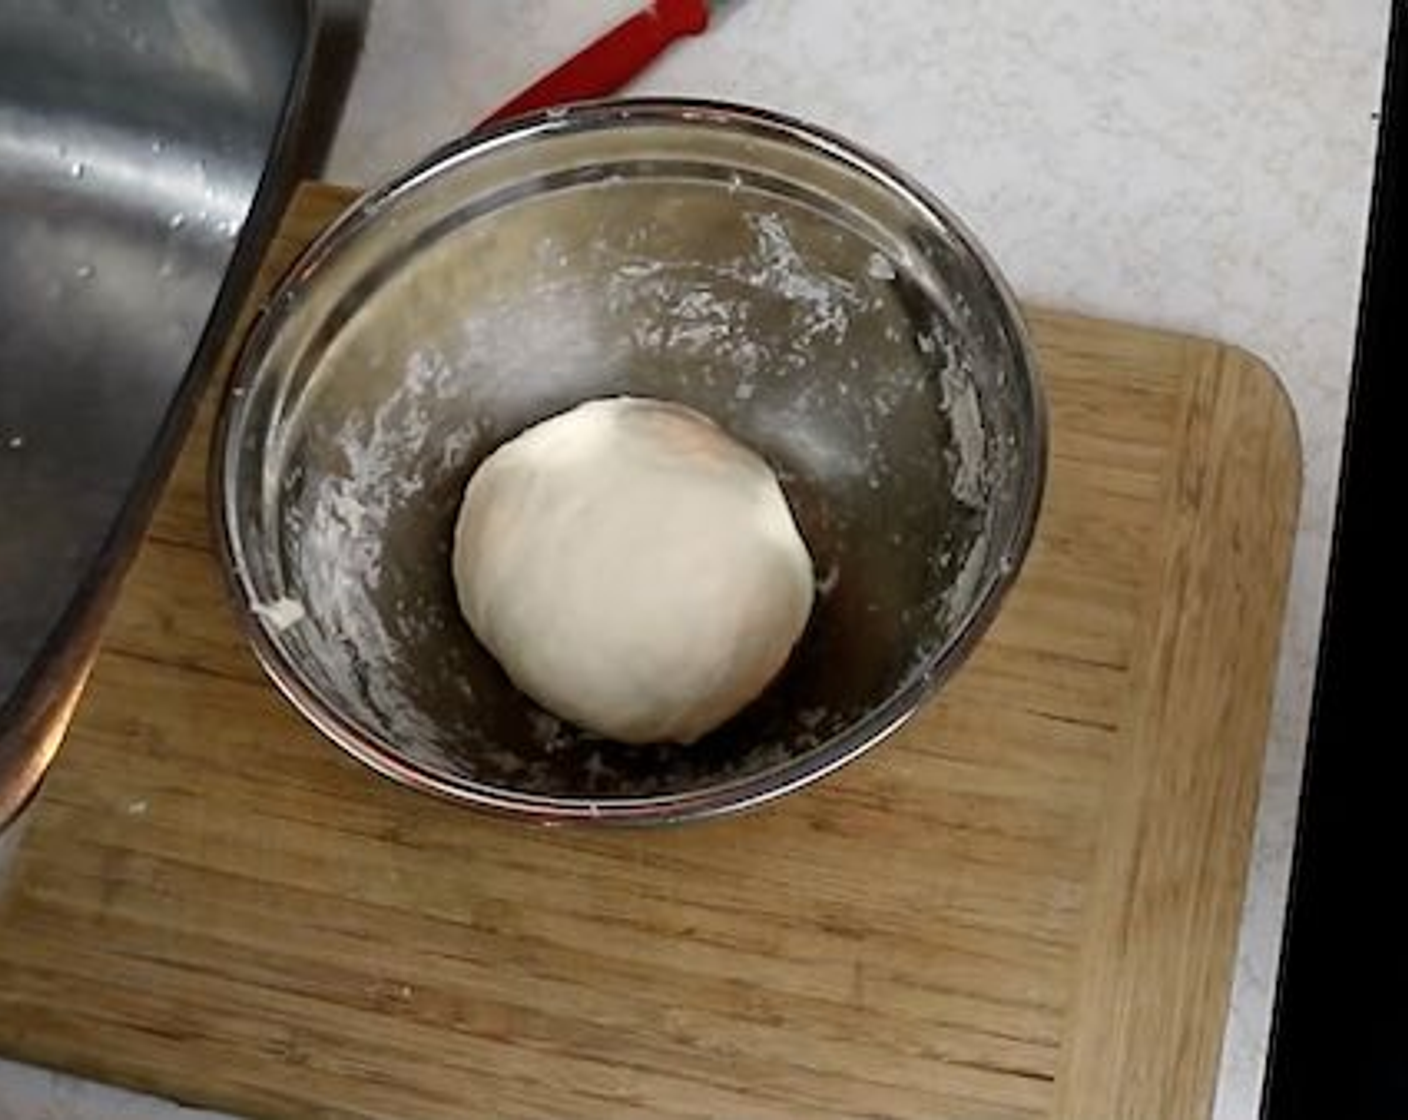 step 10 Once you've kneaded the dough into a nice ball, let It rest in the bowl while covered with a damp paper towel for about 10 minutes.